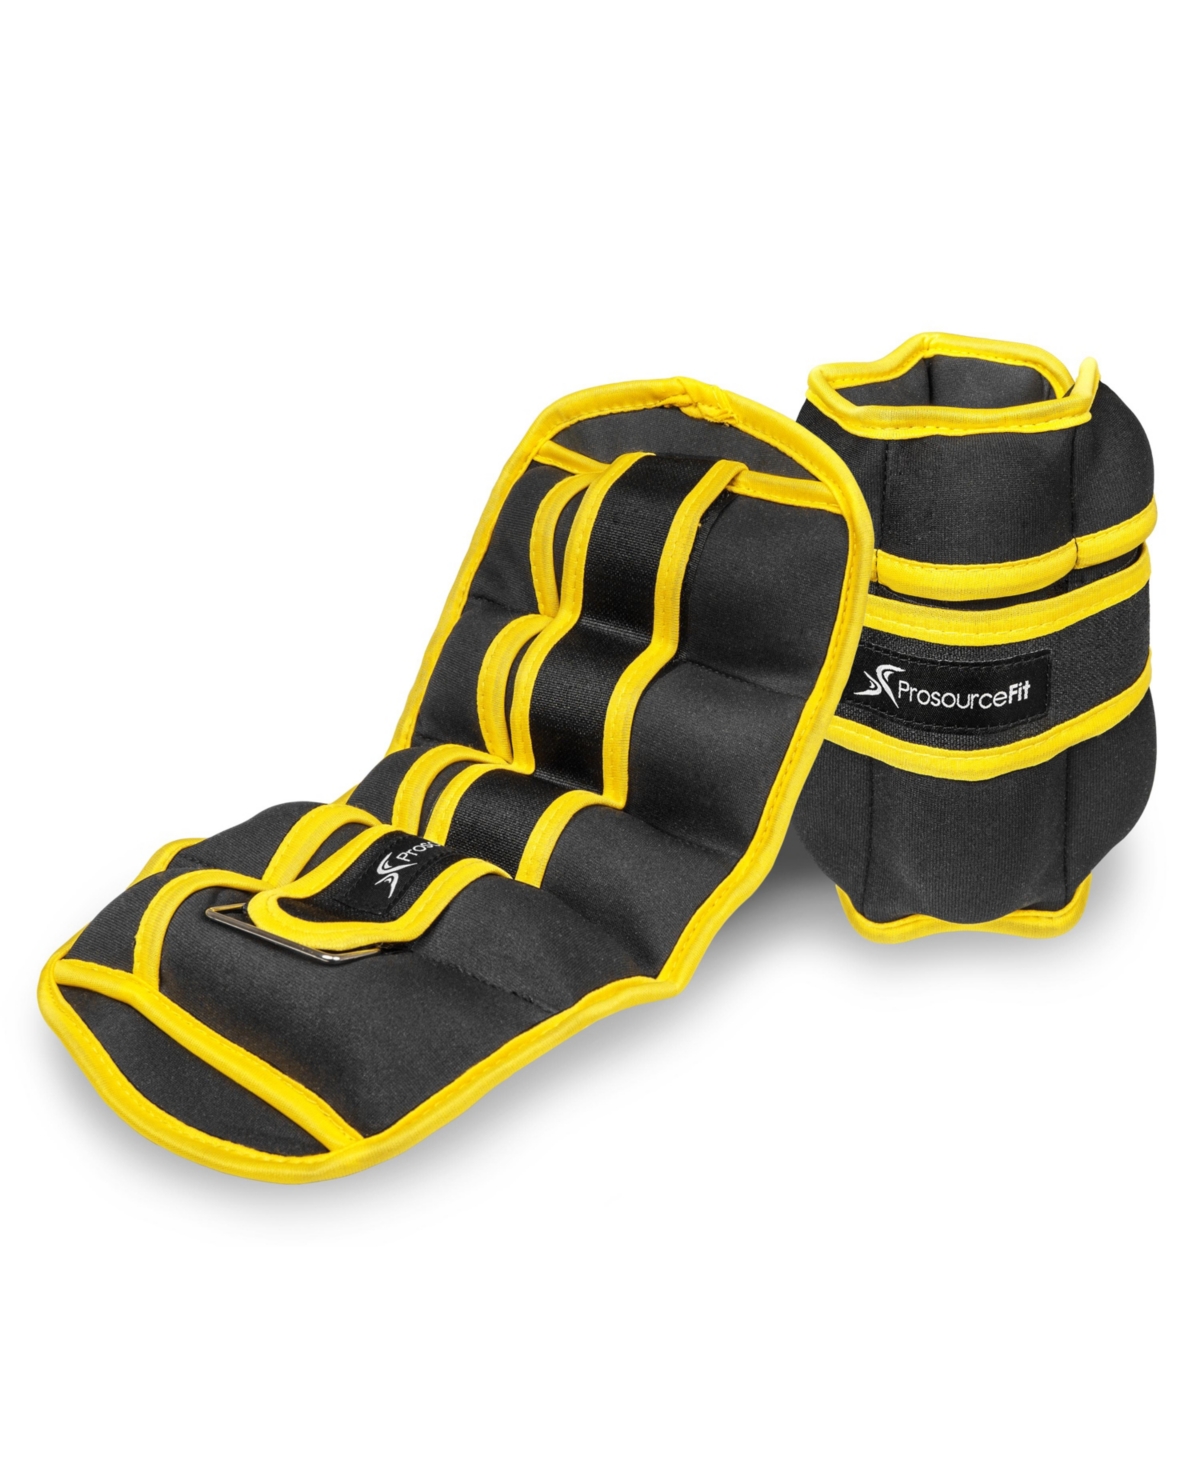 Adjustable Ankle Weights, Set of 2, 7.5lbs - Yellow